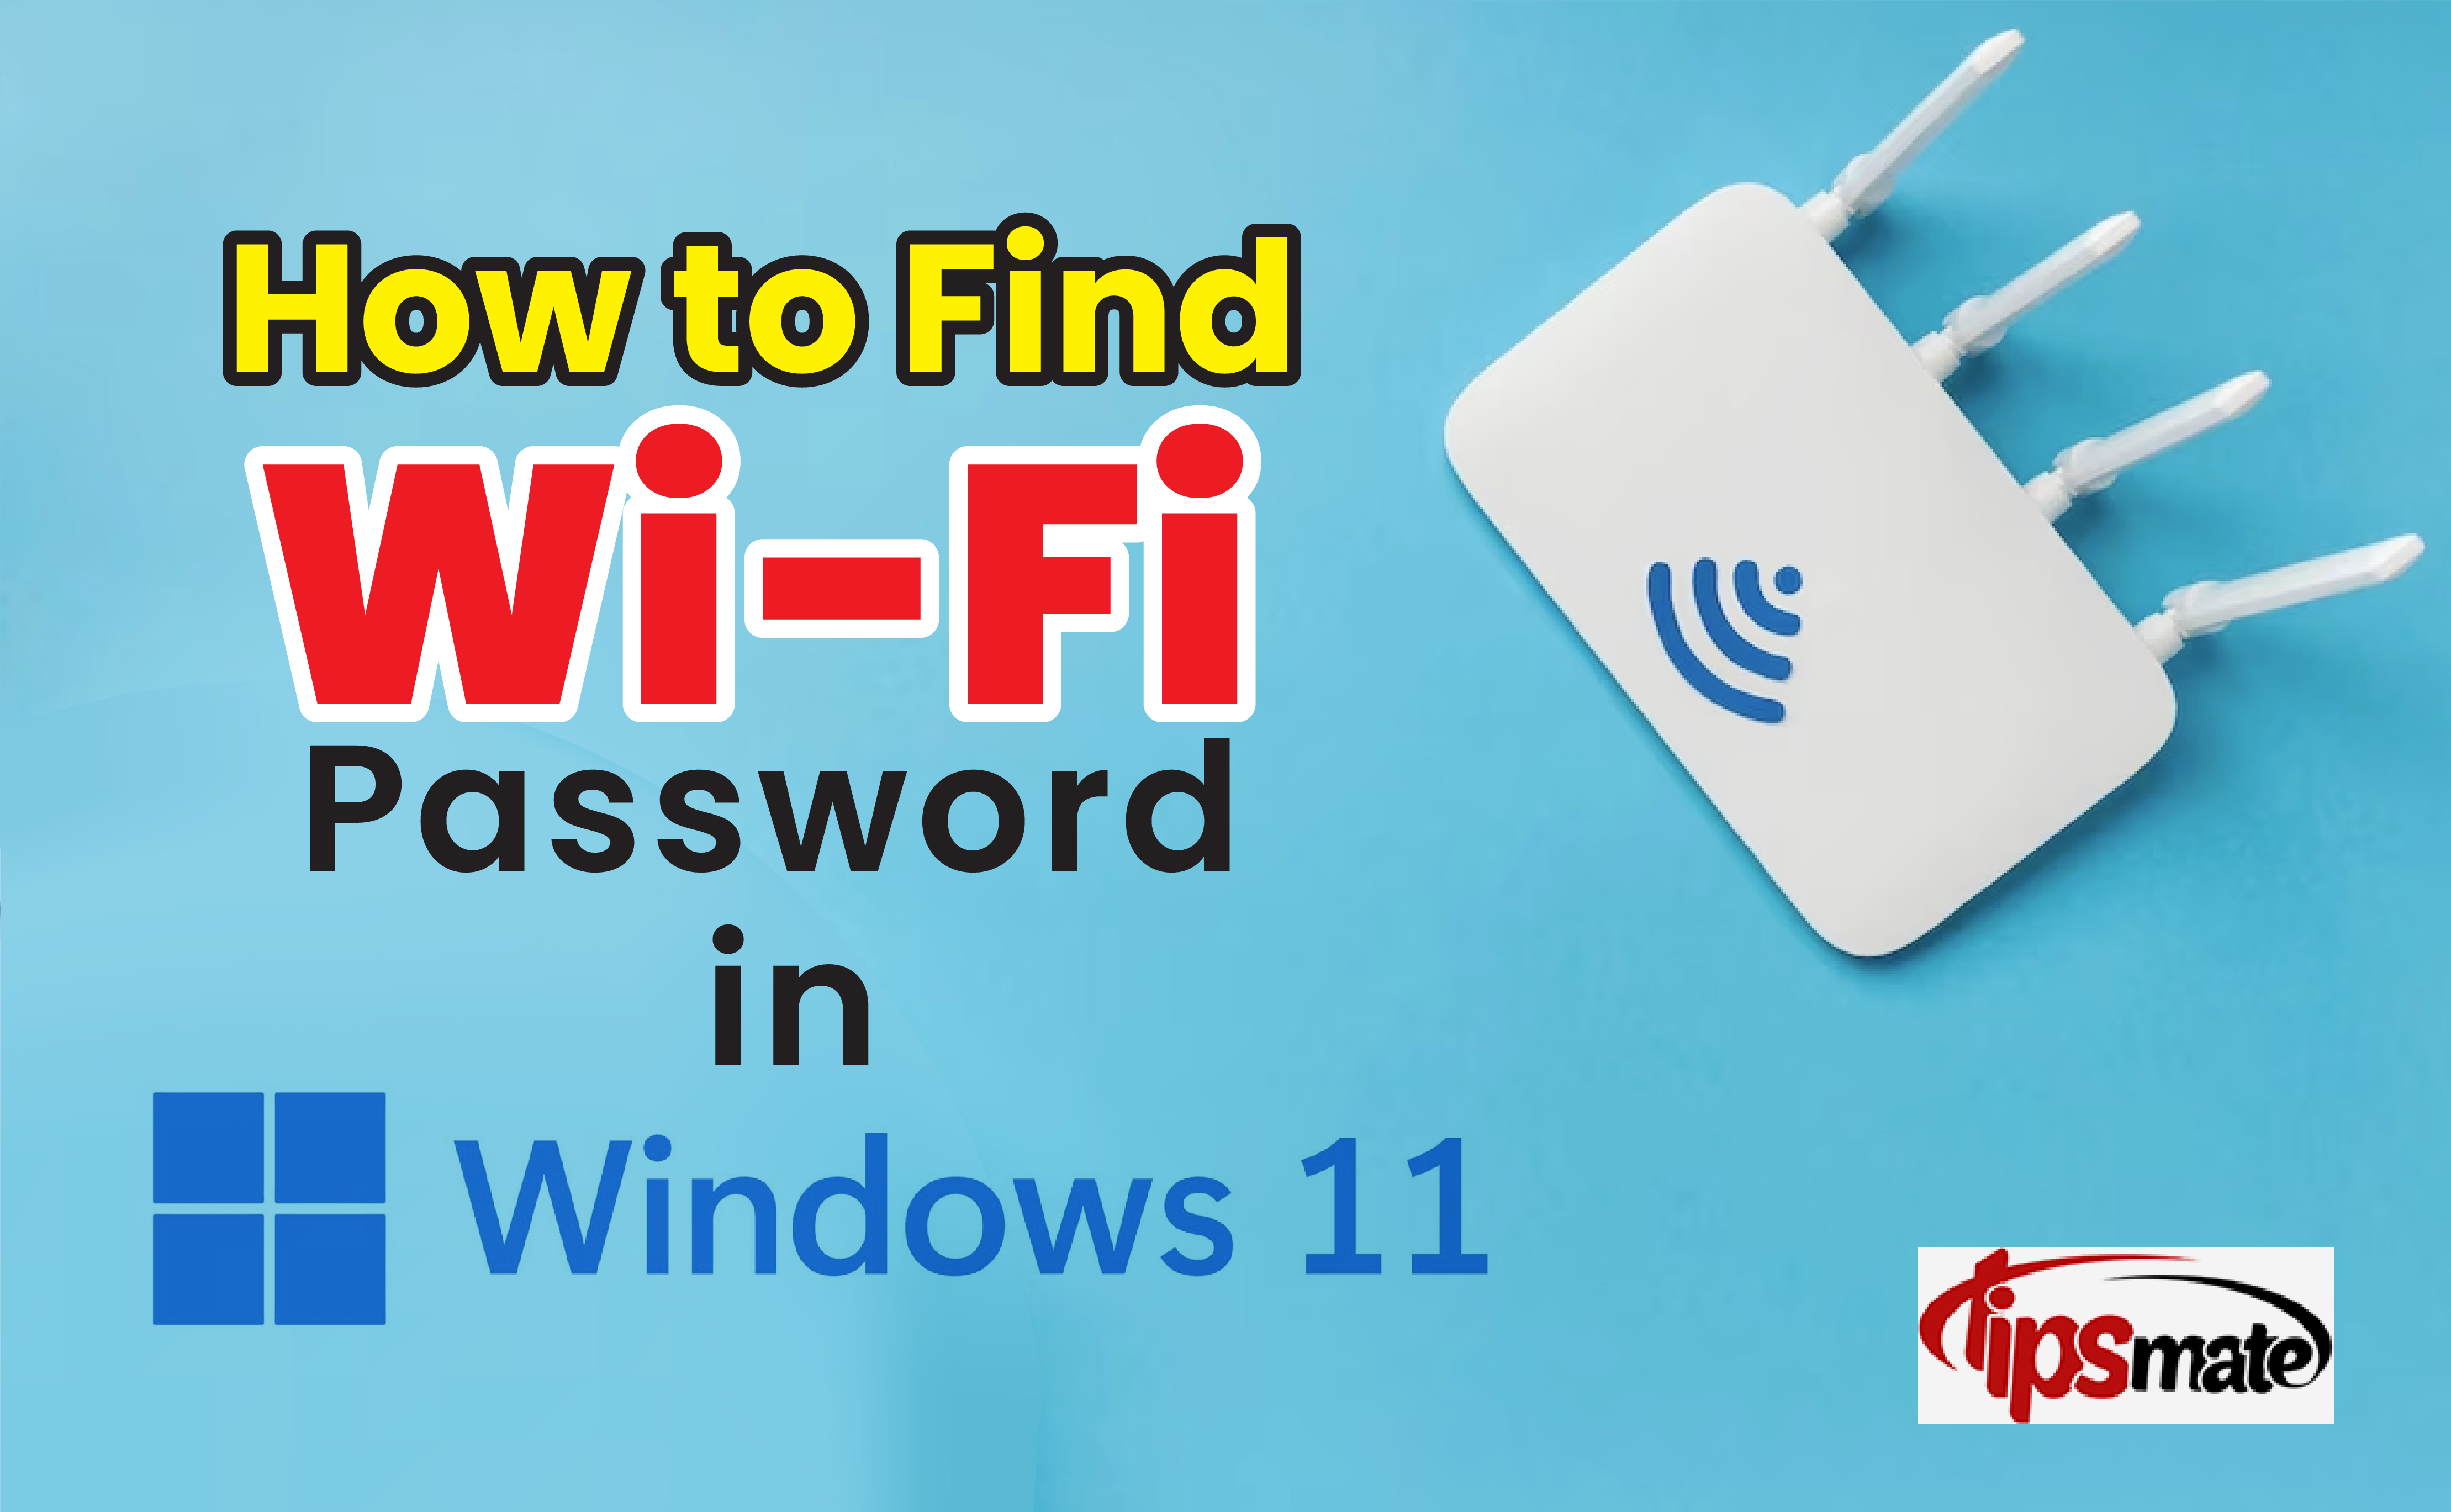 How to Find Wi-Fi Password in Windows 11